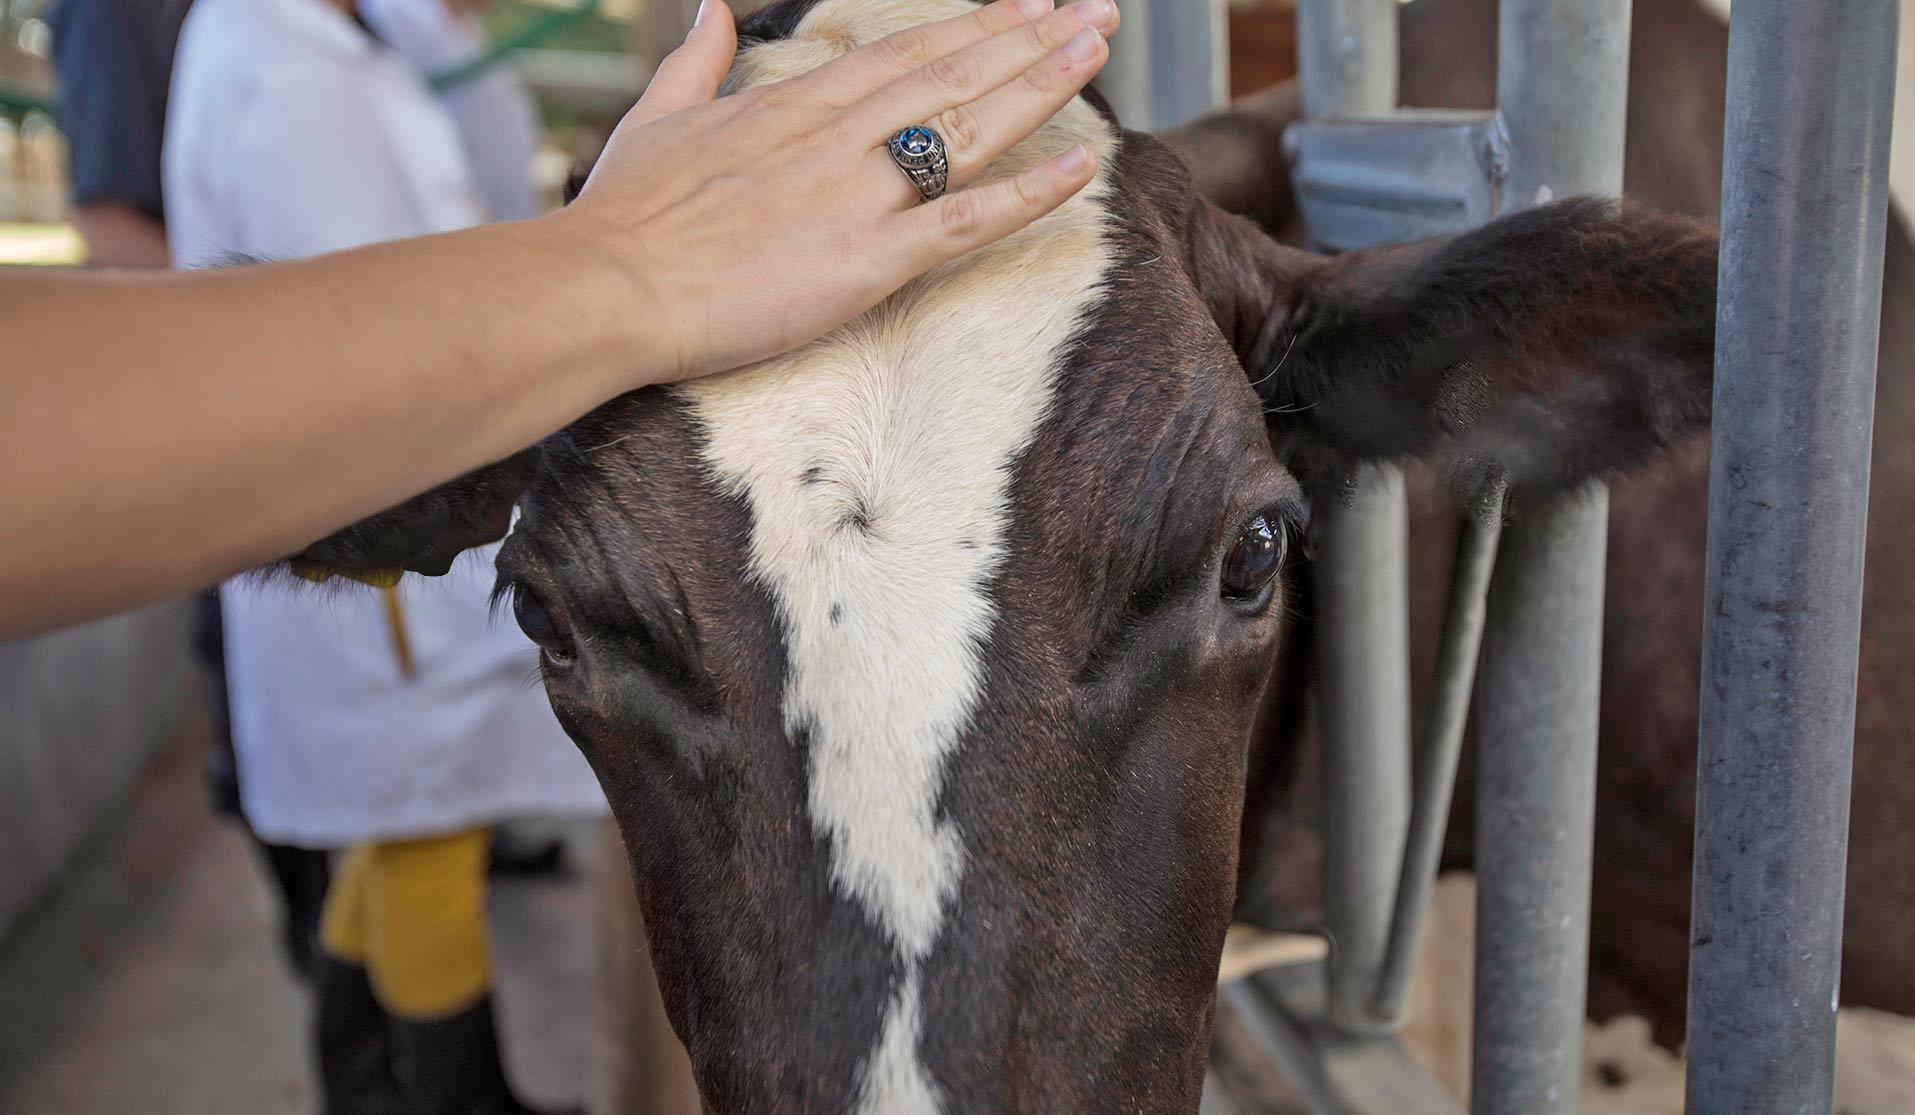 A hand petting a cow